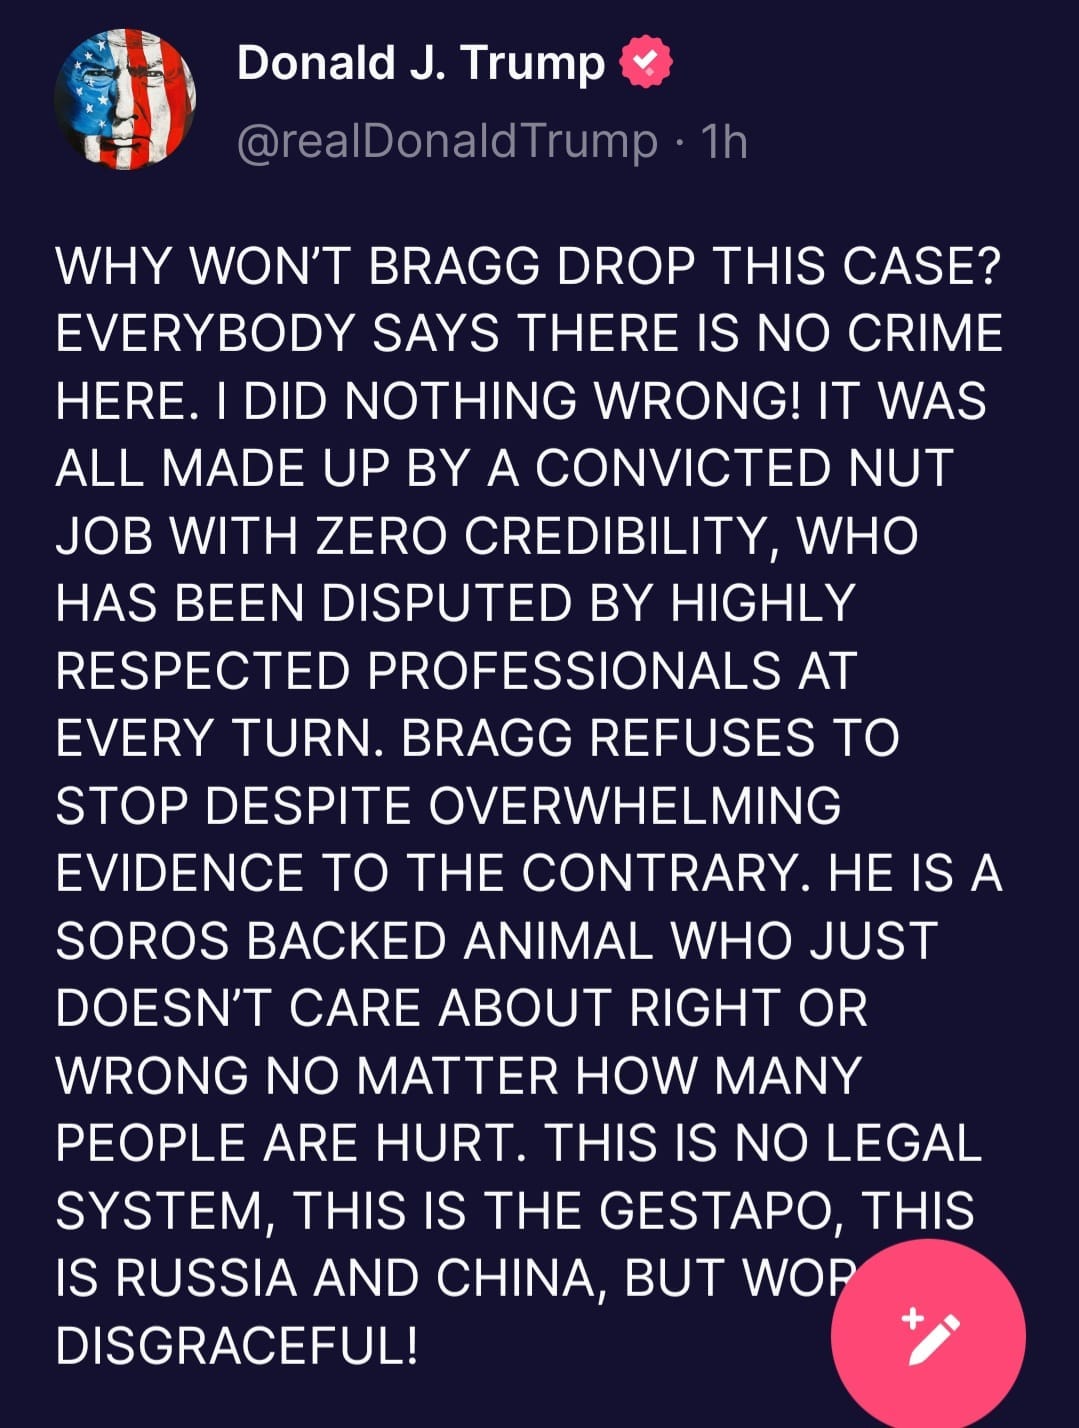 May be an image of text that says 'Donald J. Trump @realDonaldTrump 1h WHY WON'T BRAGG DROP THIS CASE? EVERYBODY SAYS THERE IS NO CRIME HERE. DID NOTHING WRONG! IT WAS ALL MADE UP BY A CONVICTED NUT JOB WITH ZERO CREDIBILITY, WHO HAS BEEN DISPUTED BY HIGHLY RESPECTED PROFESSIONALS AT EVERY TURN. BRAGG REFUSES TO STOP DESPITE OVERWHELMING EVIDENCE TO THE CONTRARY. HE IS A SOROS BACKED ANIMAL WHO JUST DOESN'T CARE ABOUT RIGHT OR WRONG NO MATTER HOW MANY PEOPLE ARE HURT. THIS IS NO LEGAL SYSTEM, THIS IS THE GESTAPO, THIS IS RUSSIA AND CHINA, BUT WOP DISGRACEFUL!'